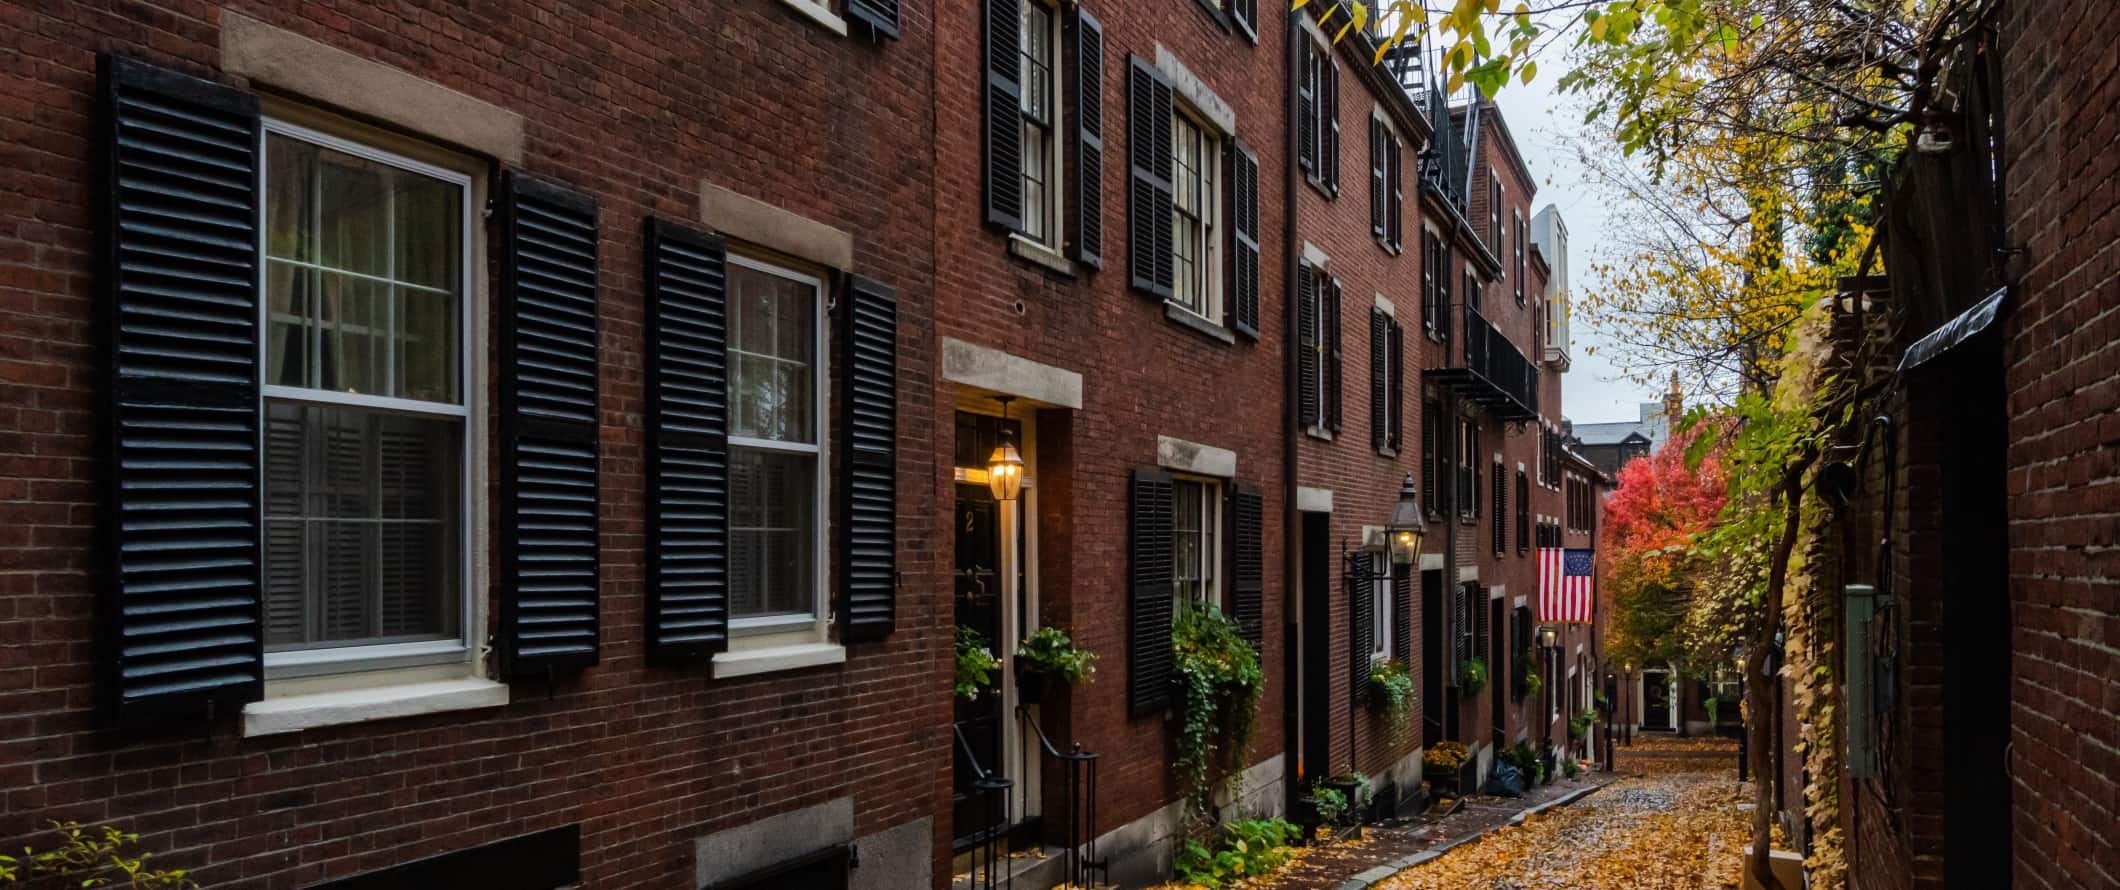 Historic brick houses with black shutters lining an alleyway with orange leaves on the ground in Boston, Massachusetts.